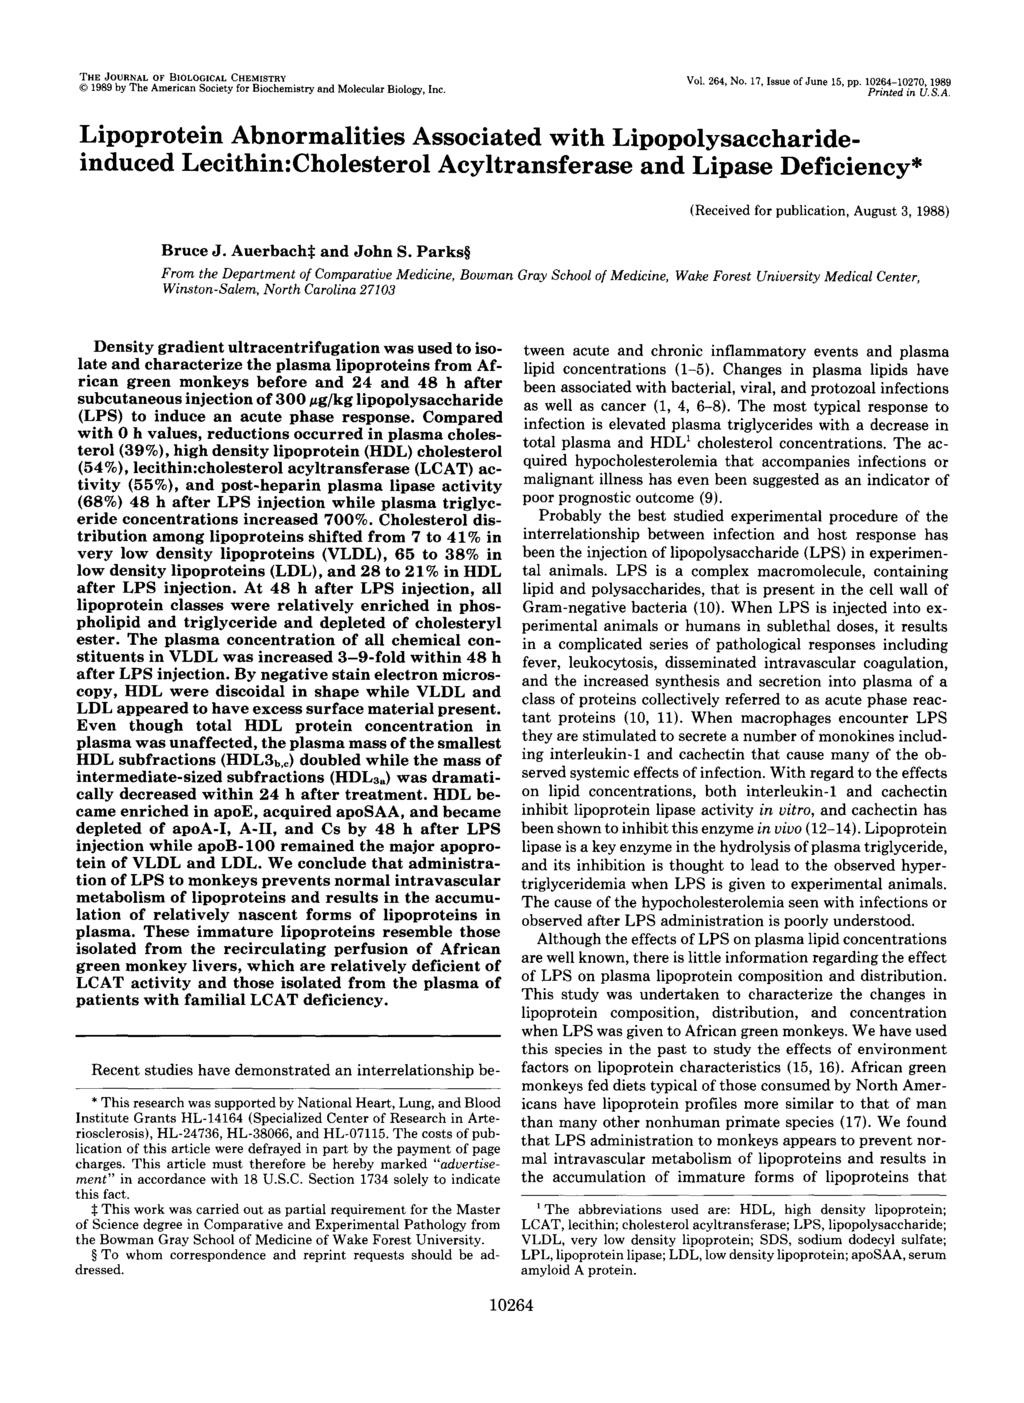 THE JOURNAL OF BOLOGCAL CHEMSTRY 0 1989 by Te American Society for Biocemistry and Molecular Biology, nc Vol. 264, No. 17, ssue of June 15, pp. 10264-10270,1989 Printed in U. S. A. Lipoprotein Abnormalities Associated wit Lipopolysaccarideinduced Lecitin:Colesterol Acyltransferase and Lipase Deficiency* Bruce J.